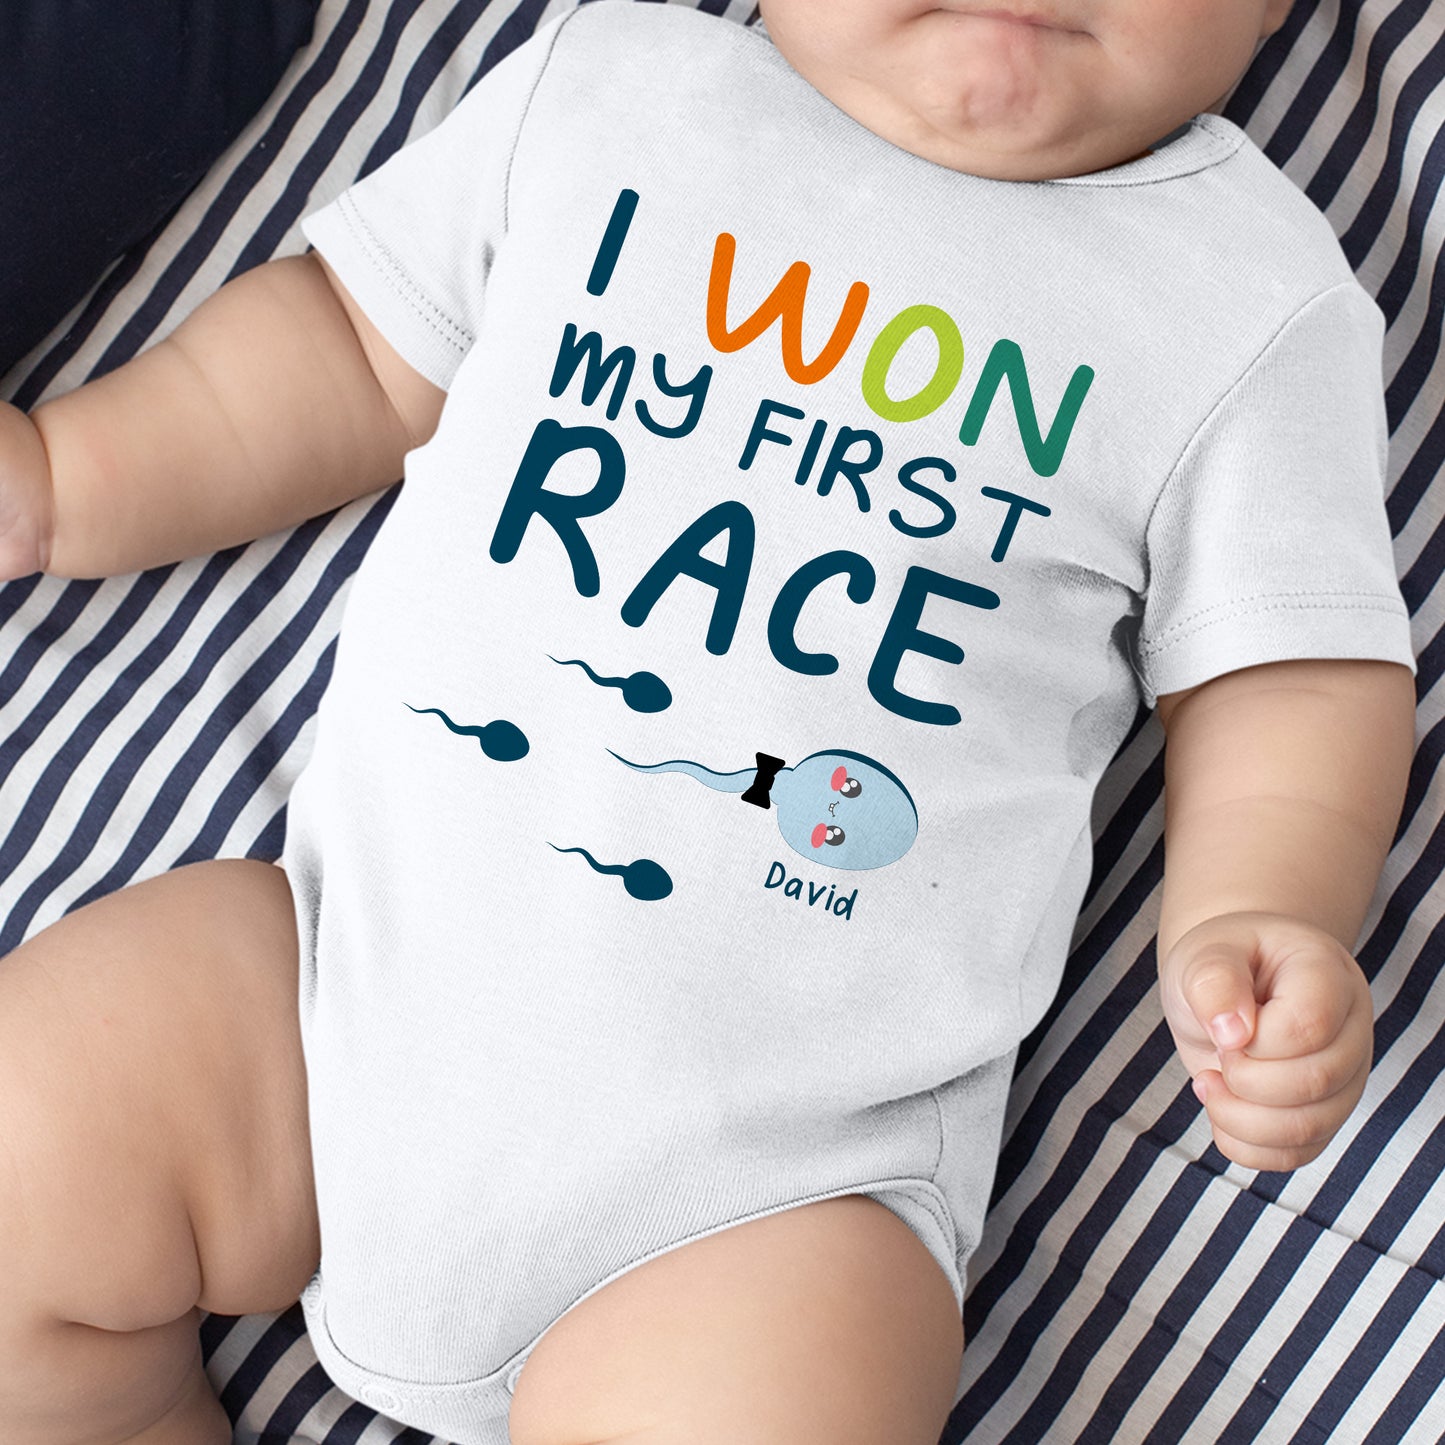 I Won My First Race - Personalized Baby Onesie